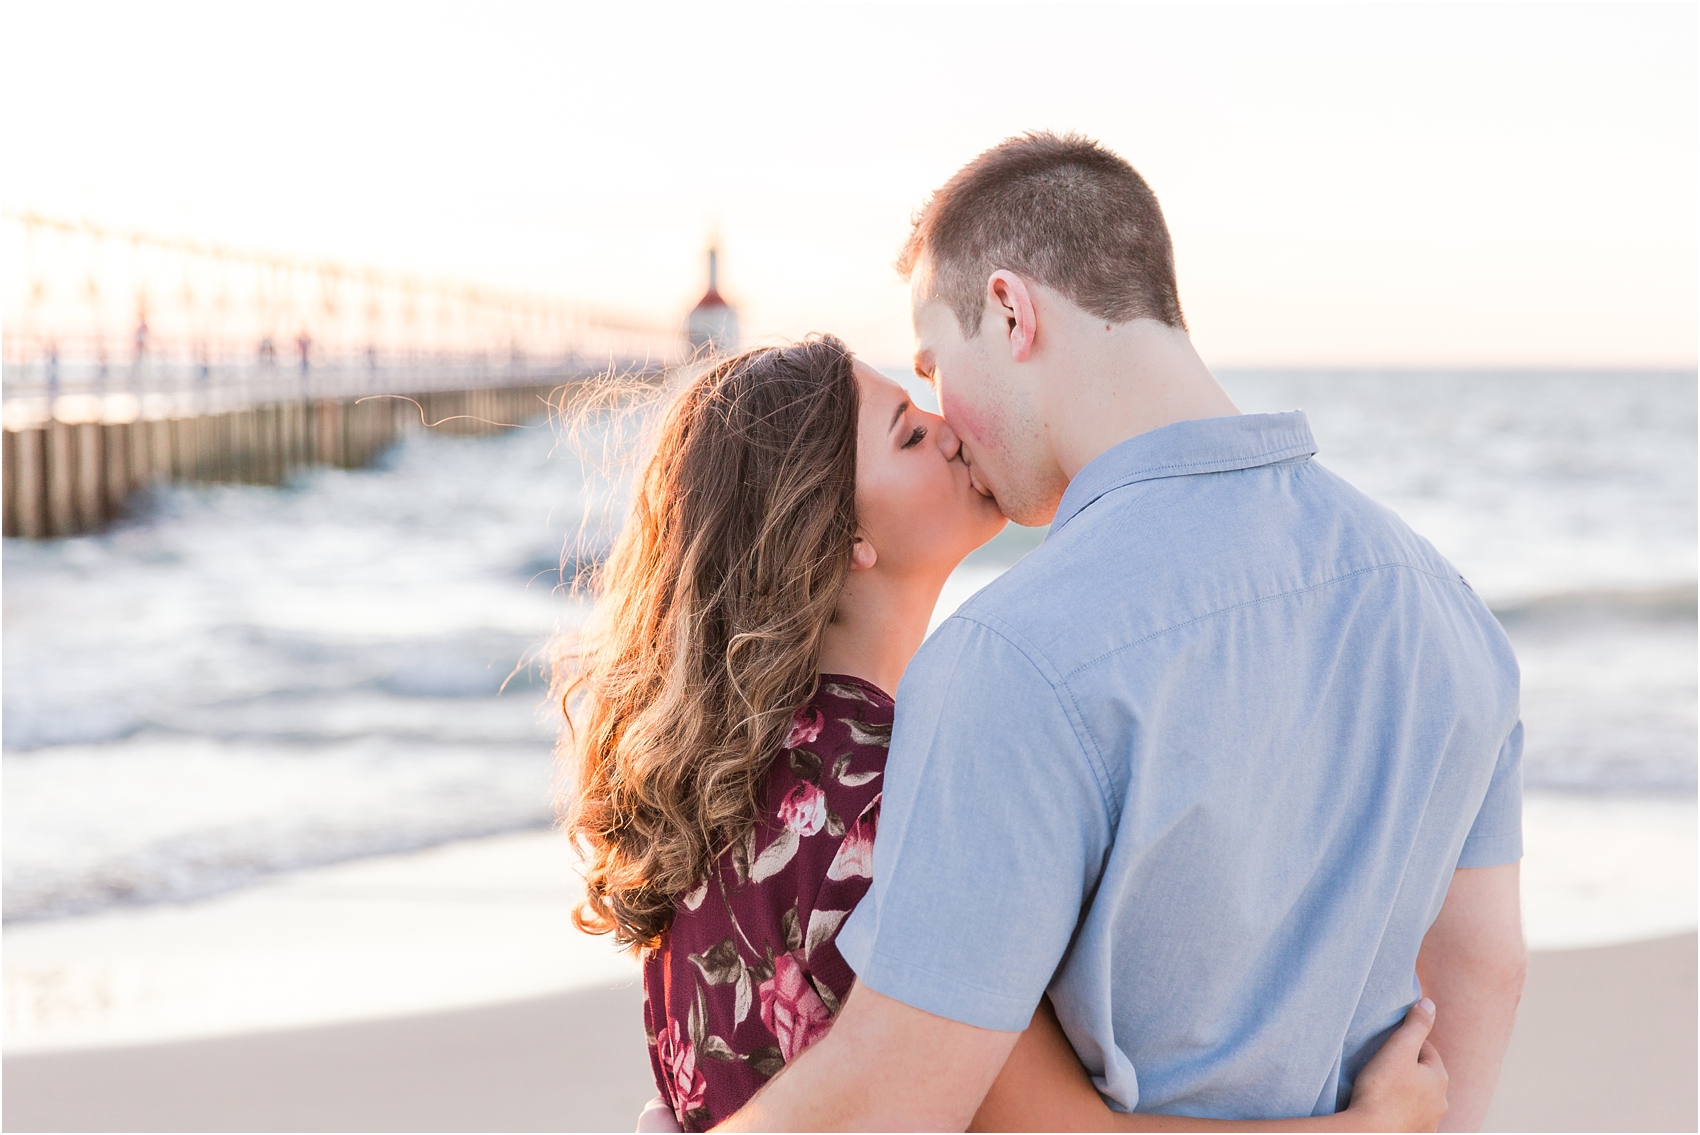 candid-end-of-summer-sunset-engagement-photos-at-silver-beach-in-st-joseph-mi-by-courtney-carolyn-photography_0021.jpg